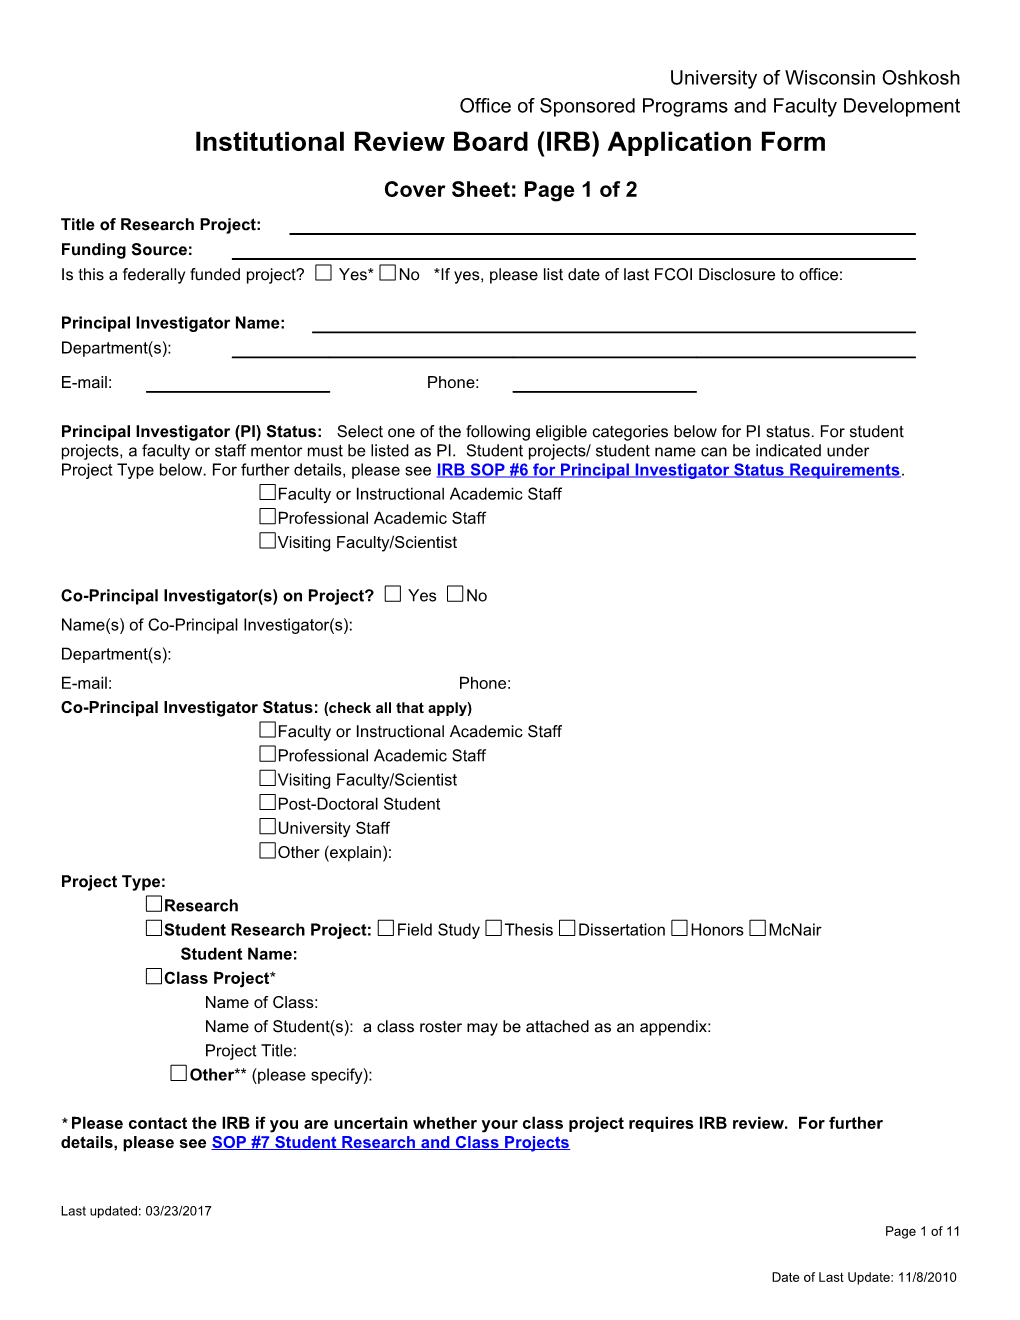 Institutional Review Board (IRB) Application Form s1